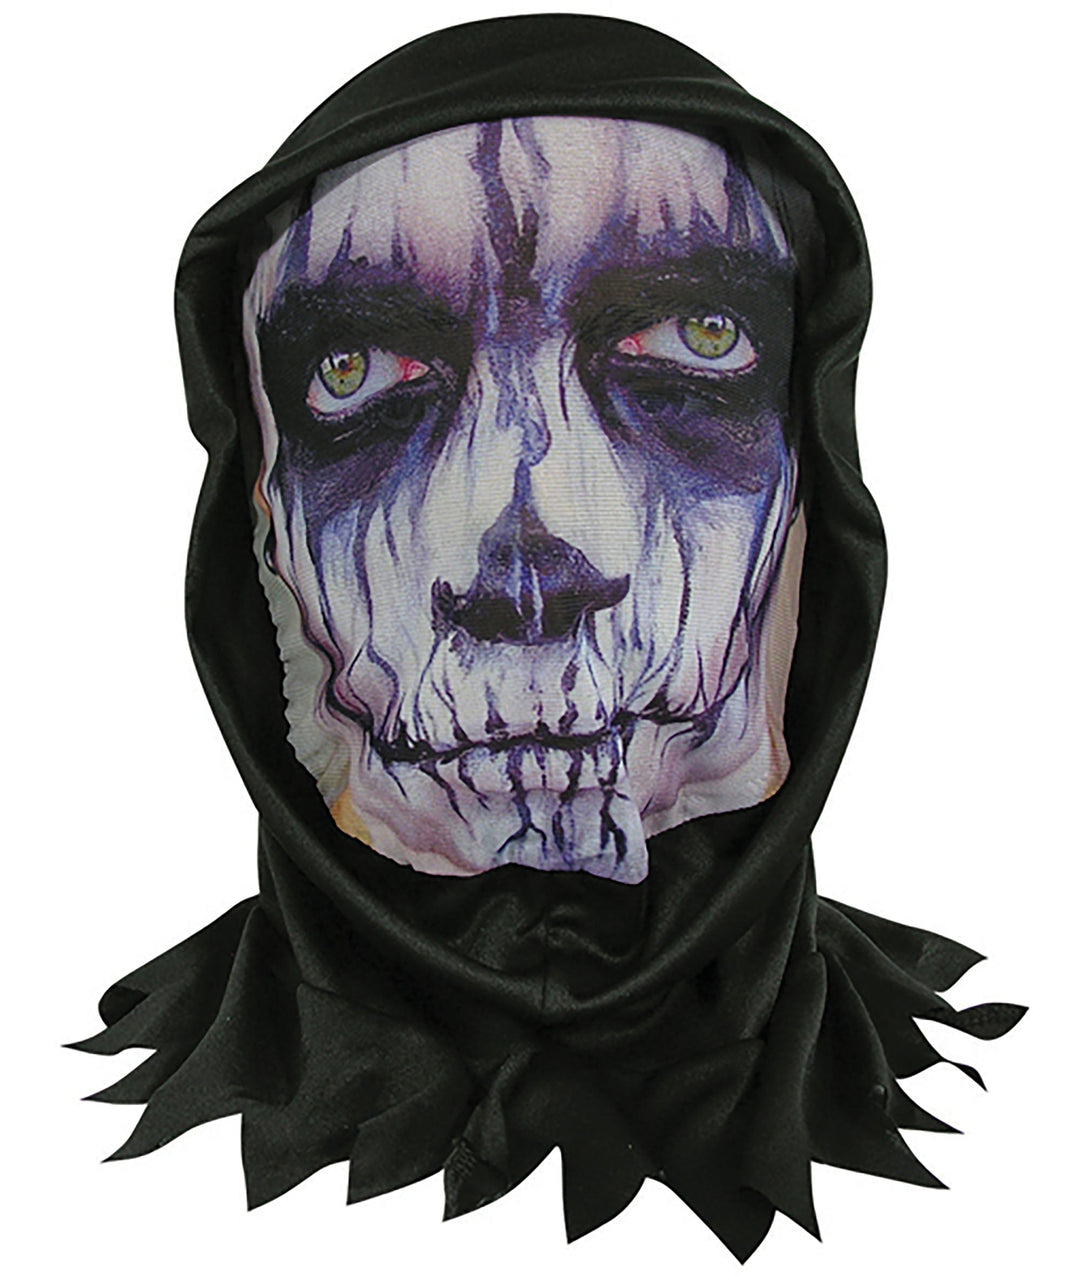 Skin Mask With Hood Stitches_1